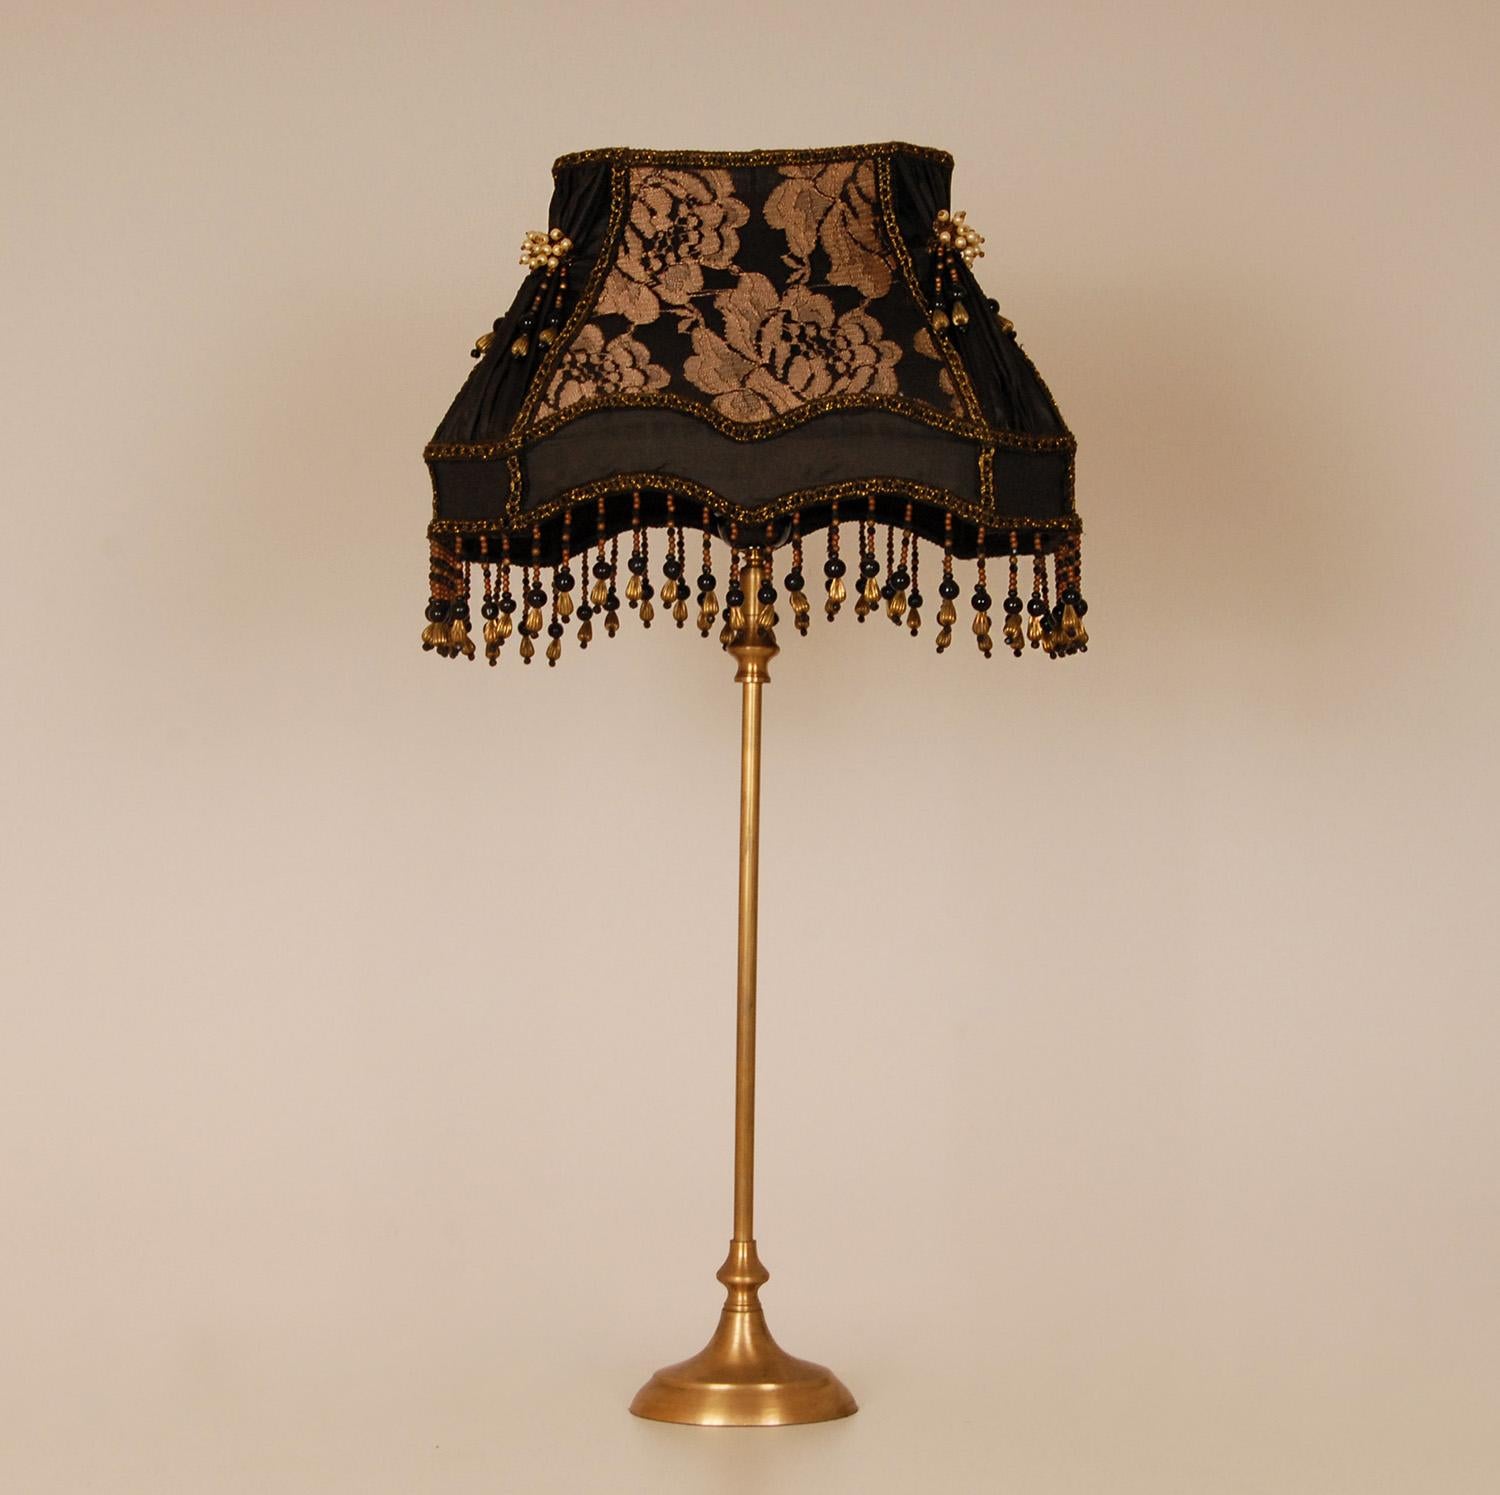 Vintage French Baroque Lamp Fringed Beaded 1970s Gold and Black For Sale 4